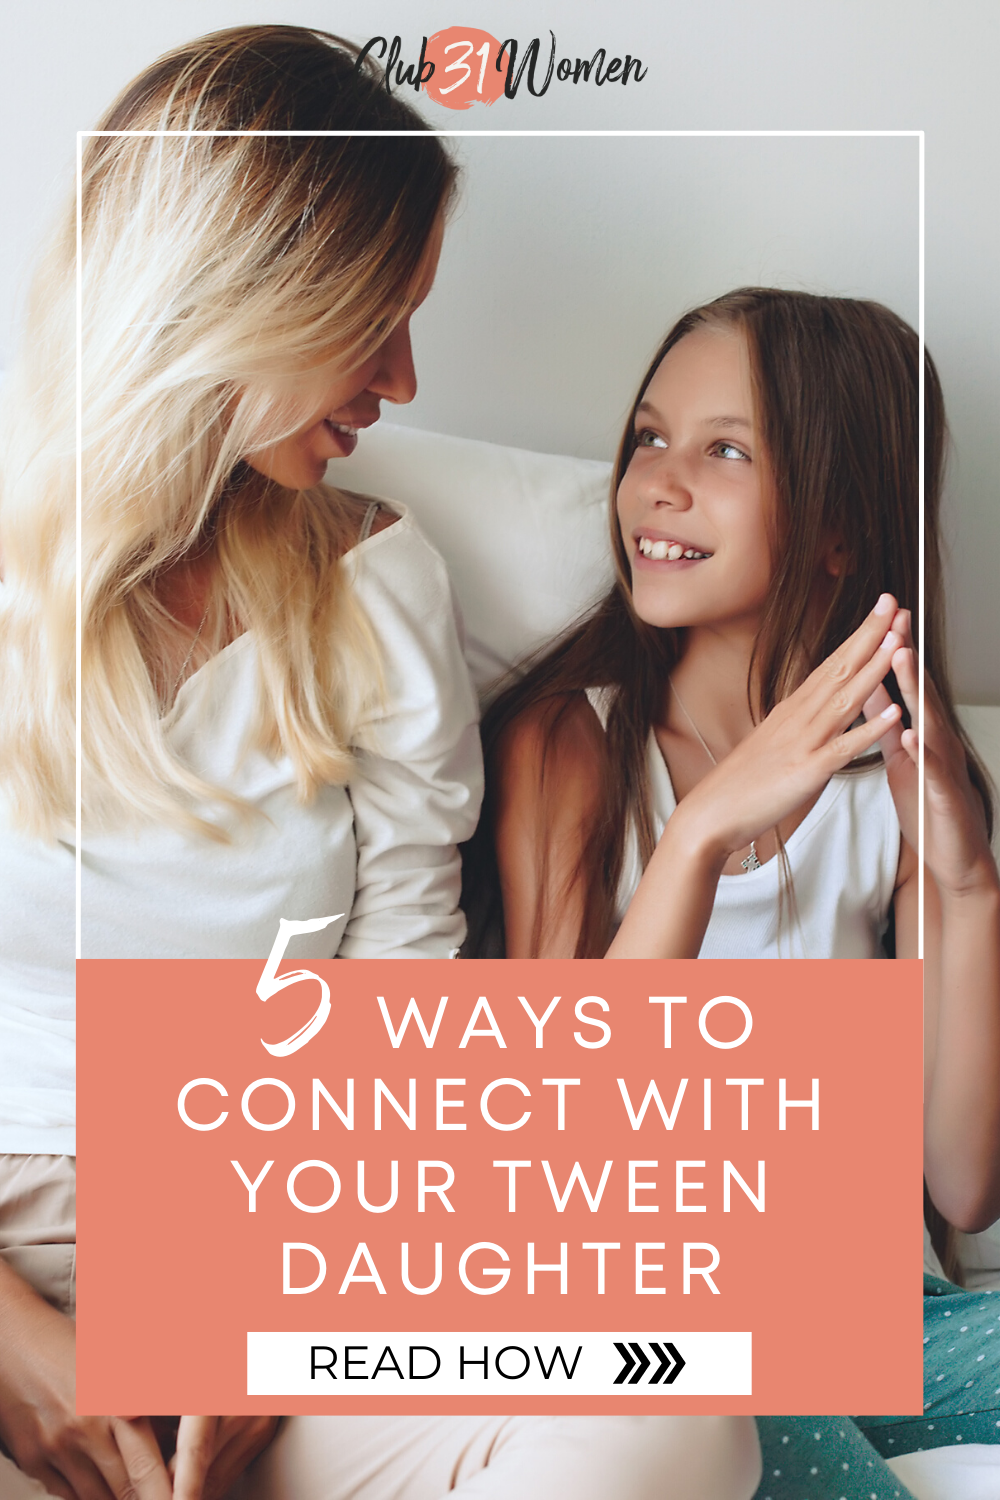 5 Bridges to Connect with Your Daughter and Keep Your Relationship Strong via @Club31Women